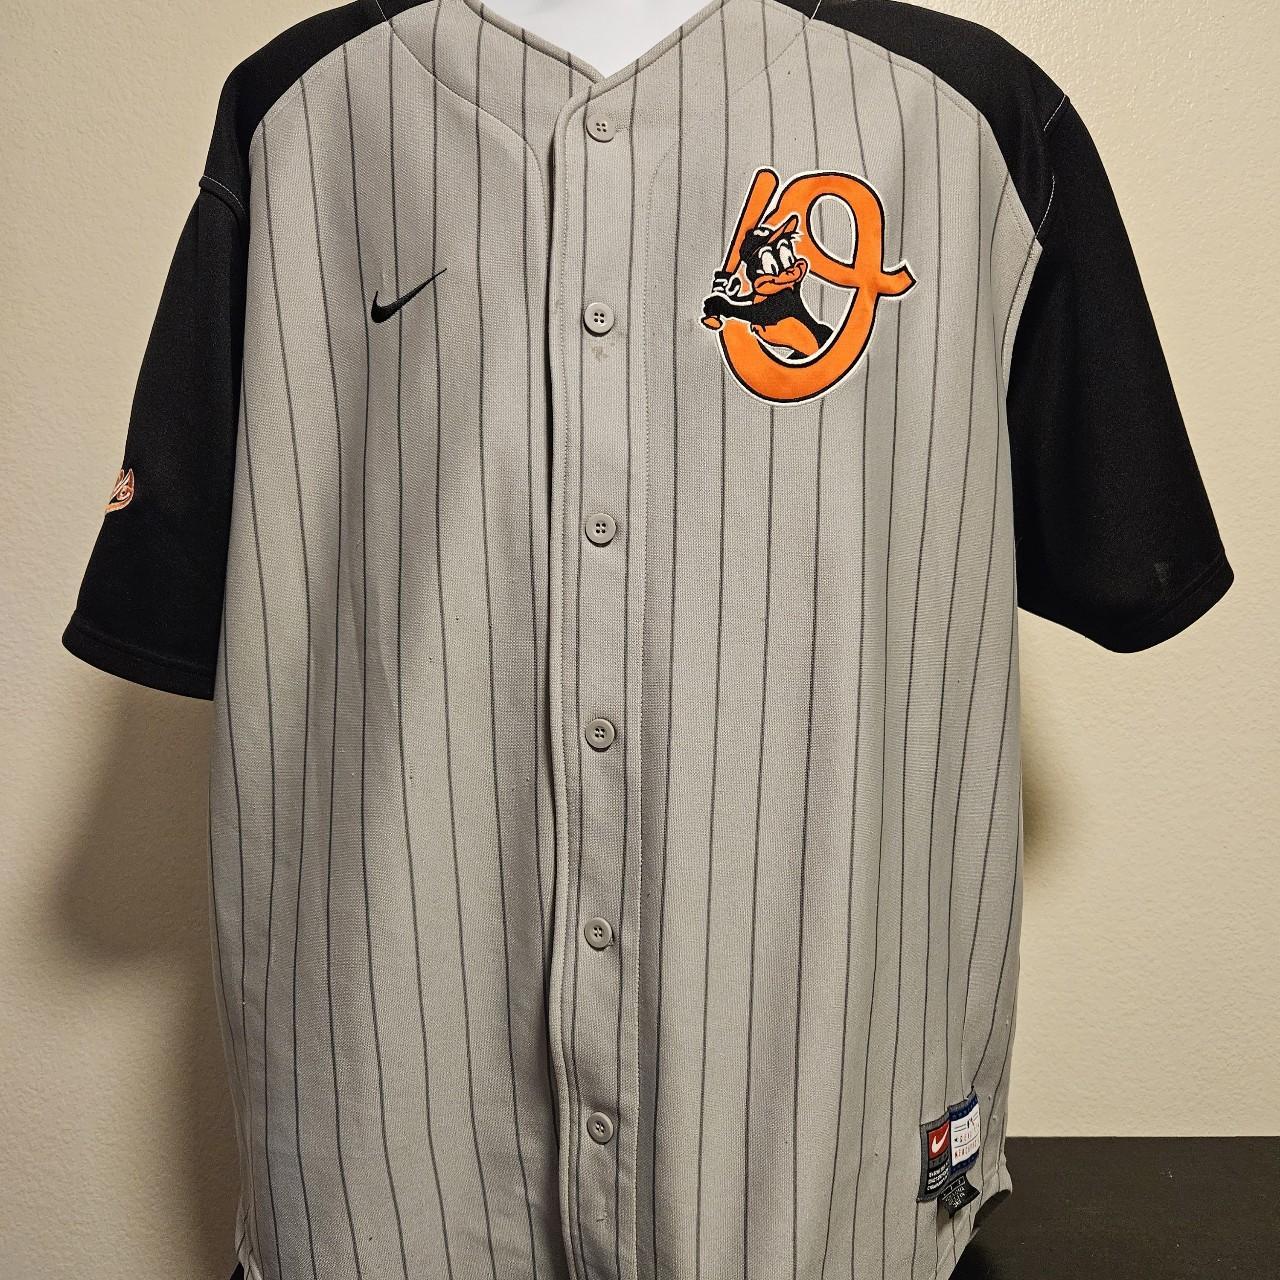 Nike Baltimore Orioles MLB Jerseys for sale